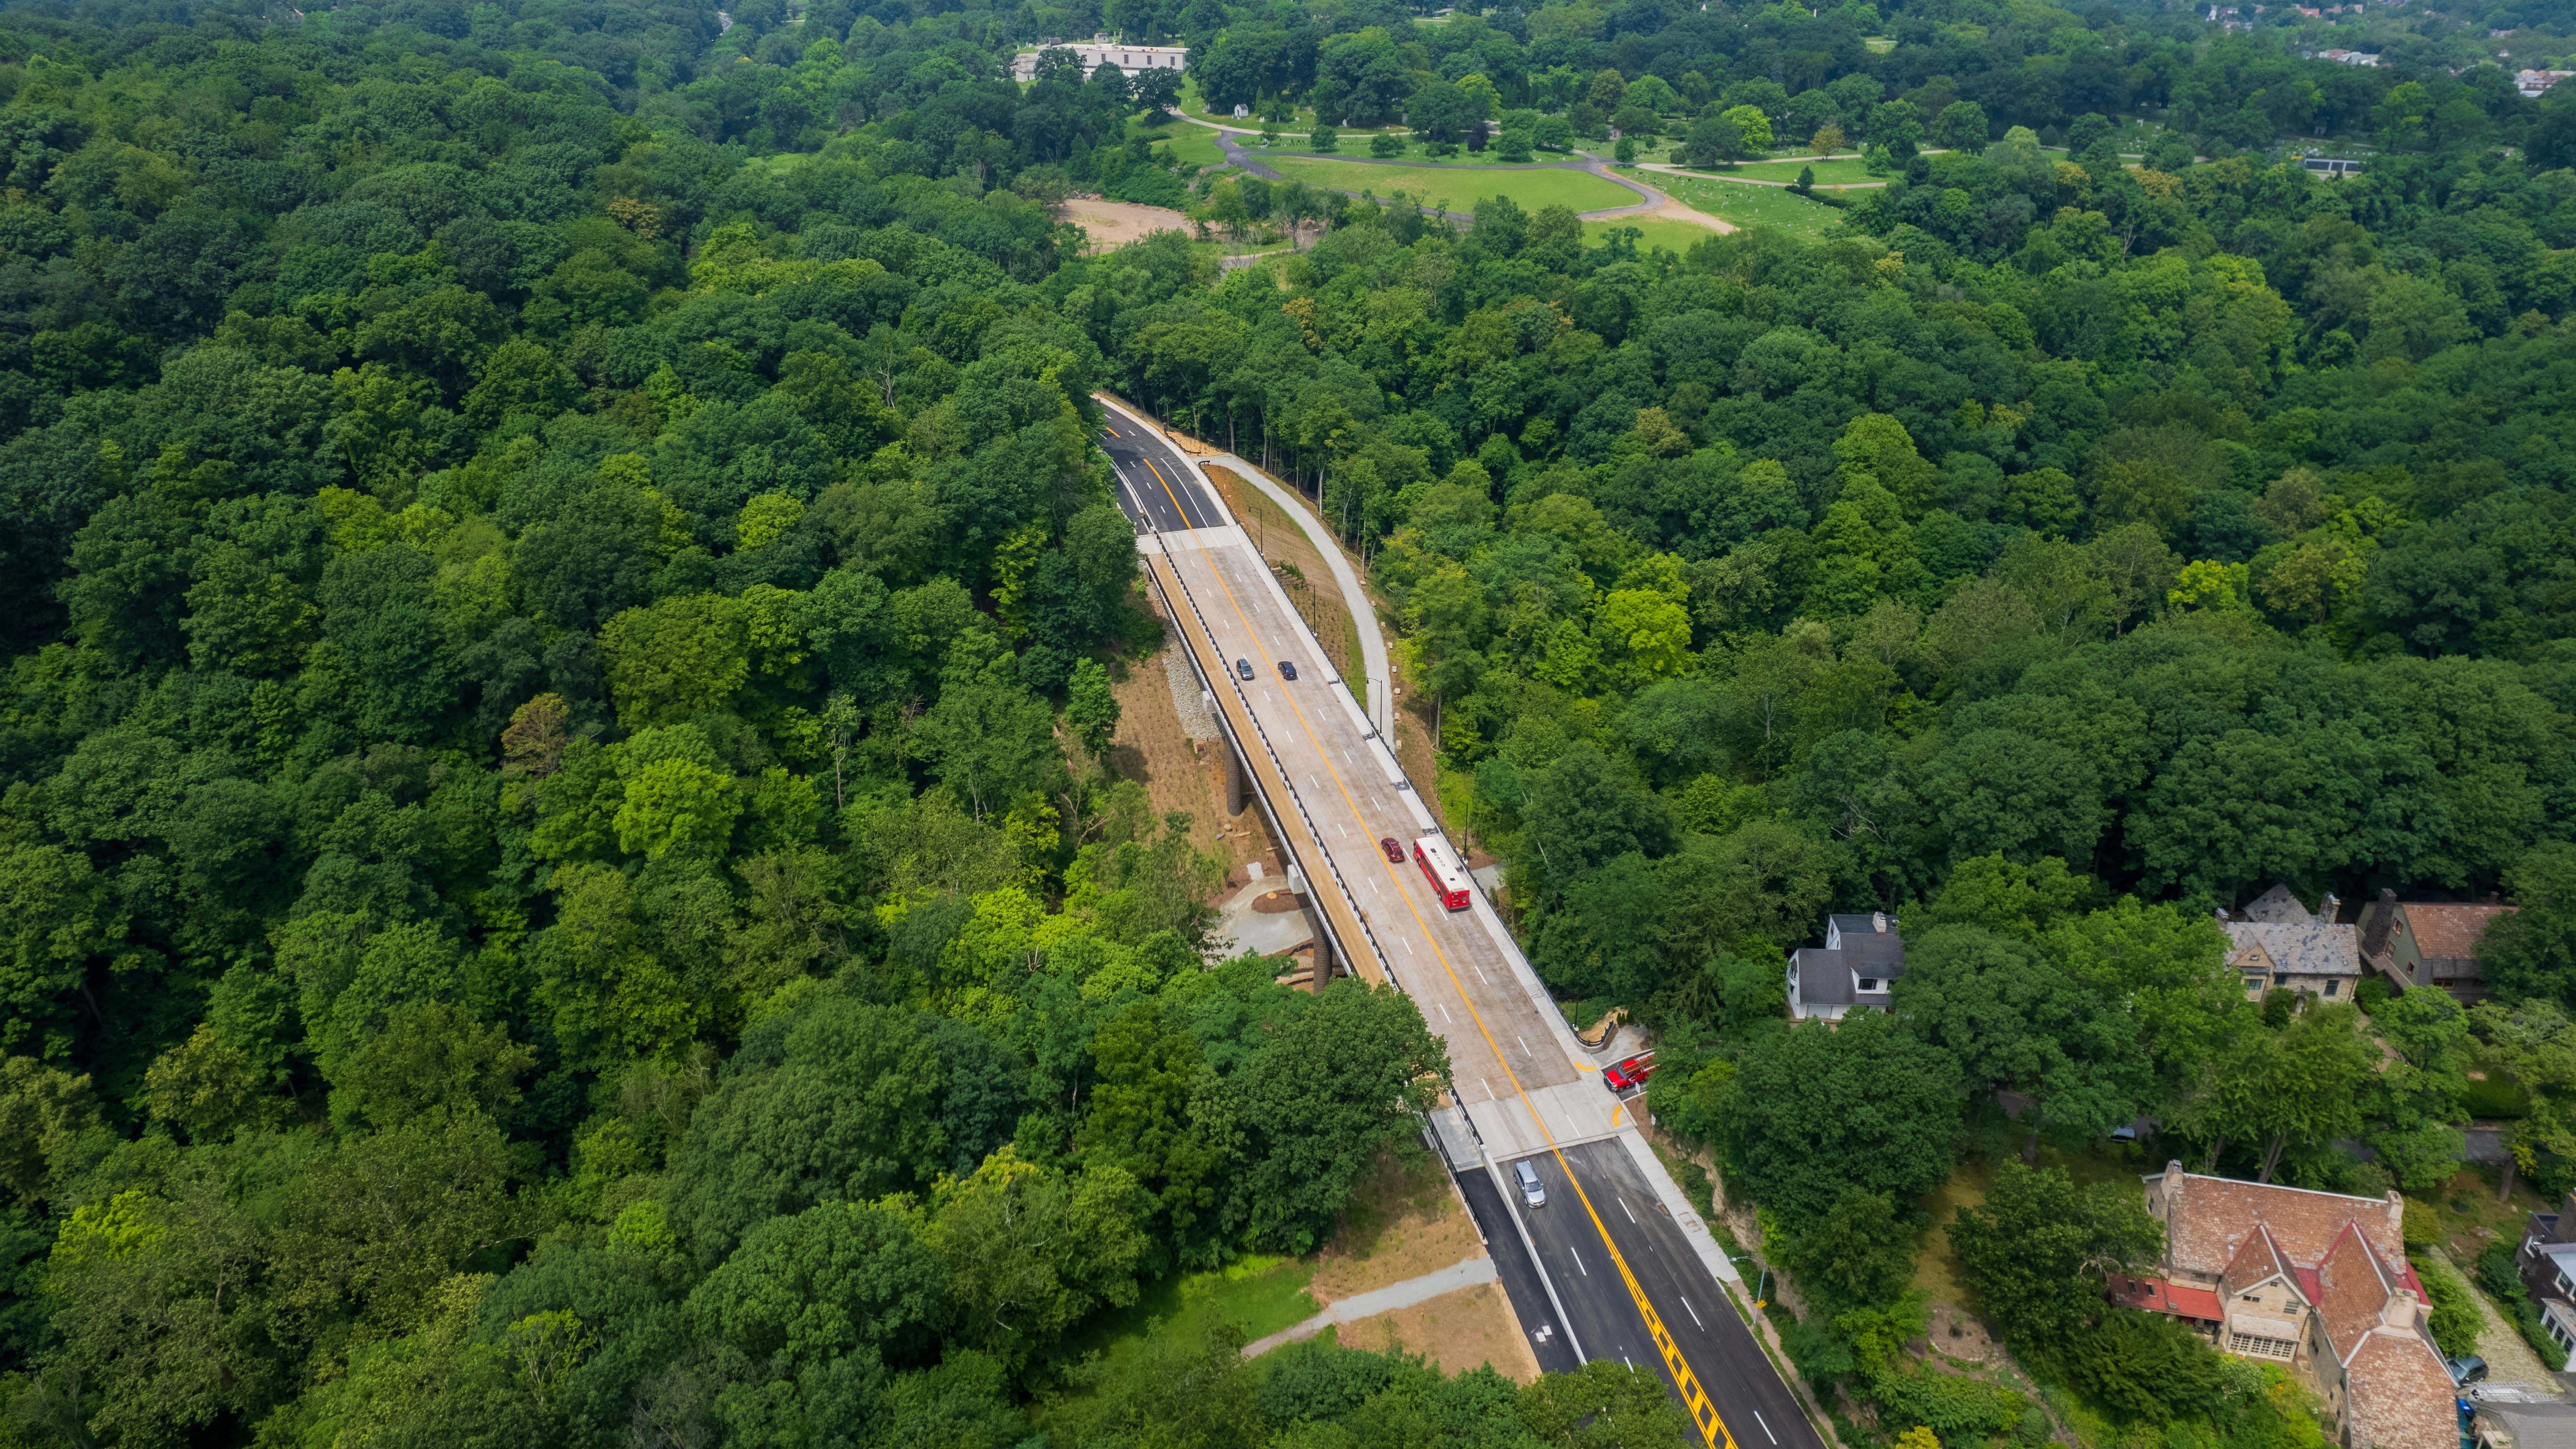 An aerial image of a red Pittsburgh Regional Transit bus and several other vehicles crossing the completed Fern Hollow Bridge